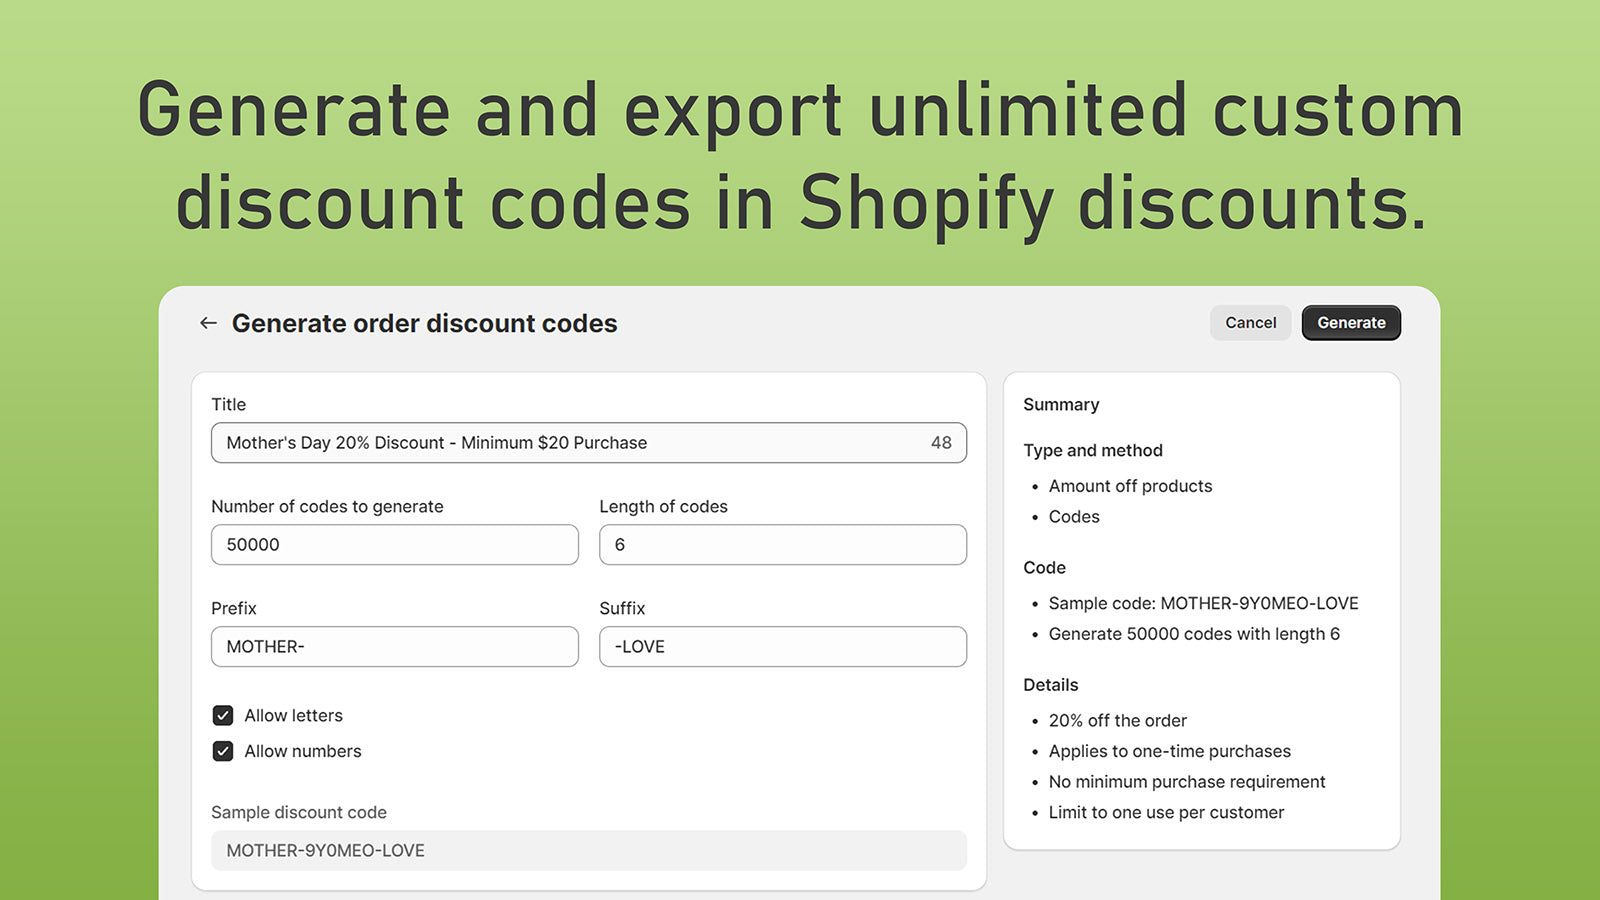 Customize your discount codes and generate in bulk